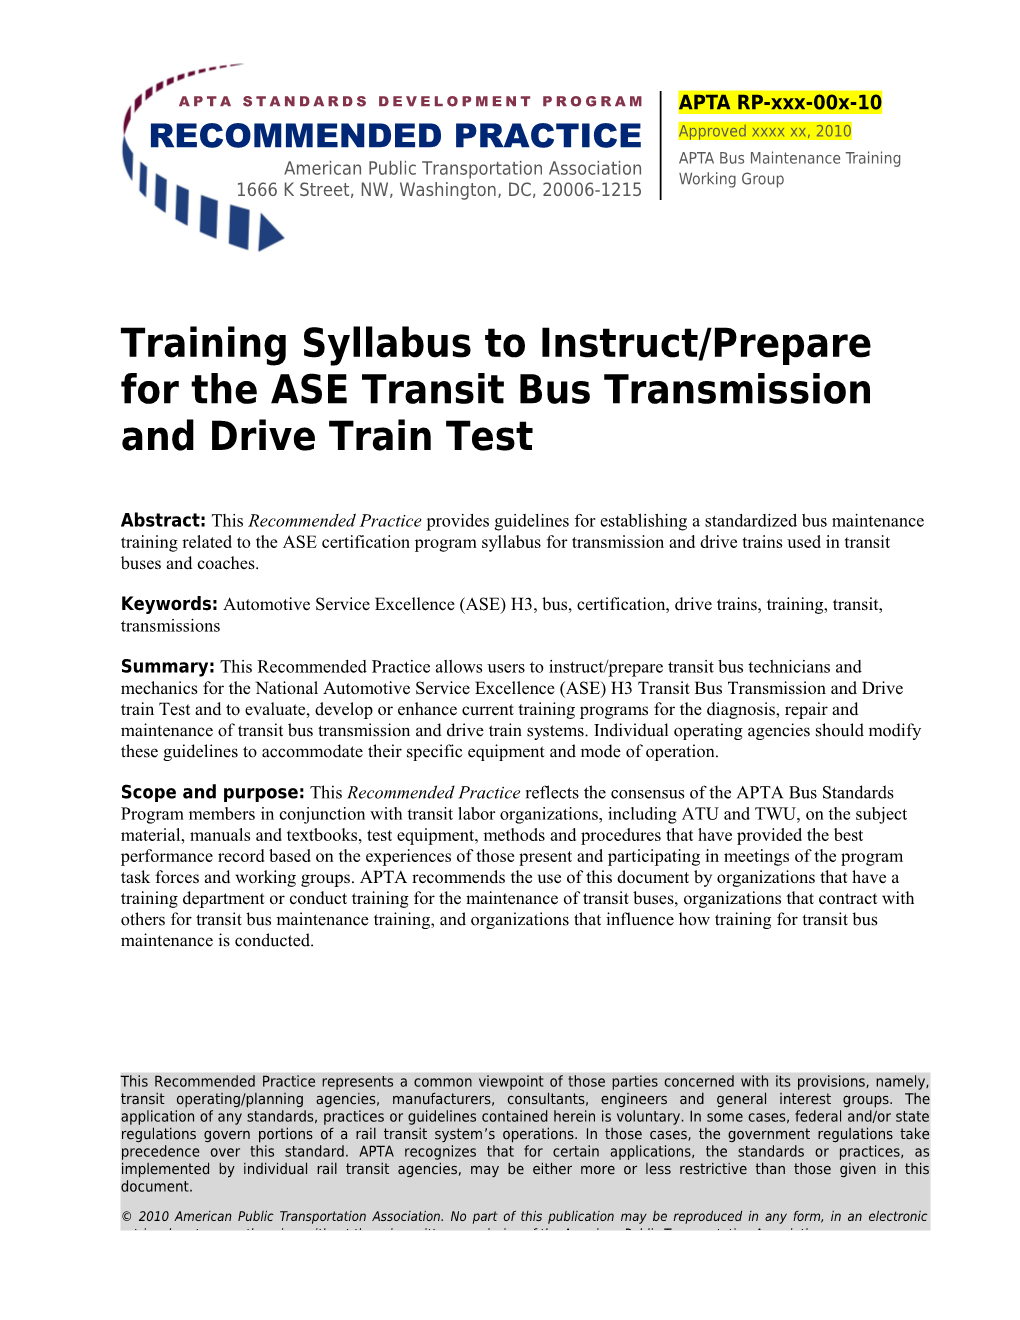 Training Syllabus to Instruct/Prepare for the ASE Transit Bus Transmission and Drive Train Test